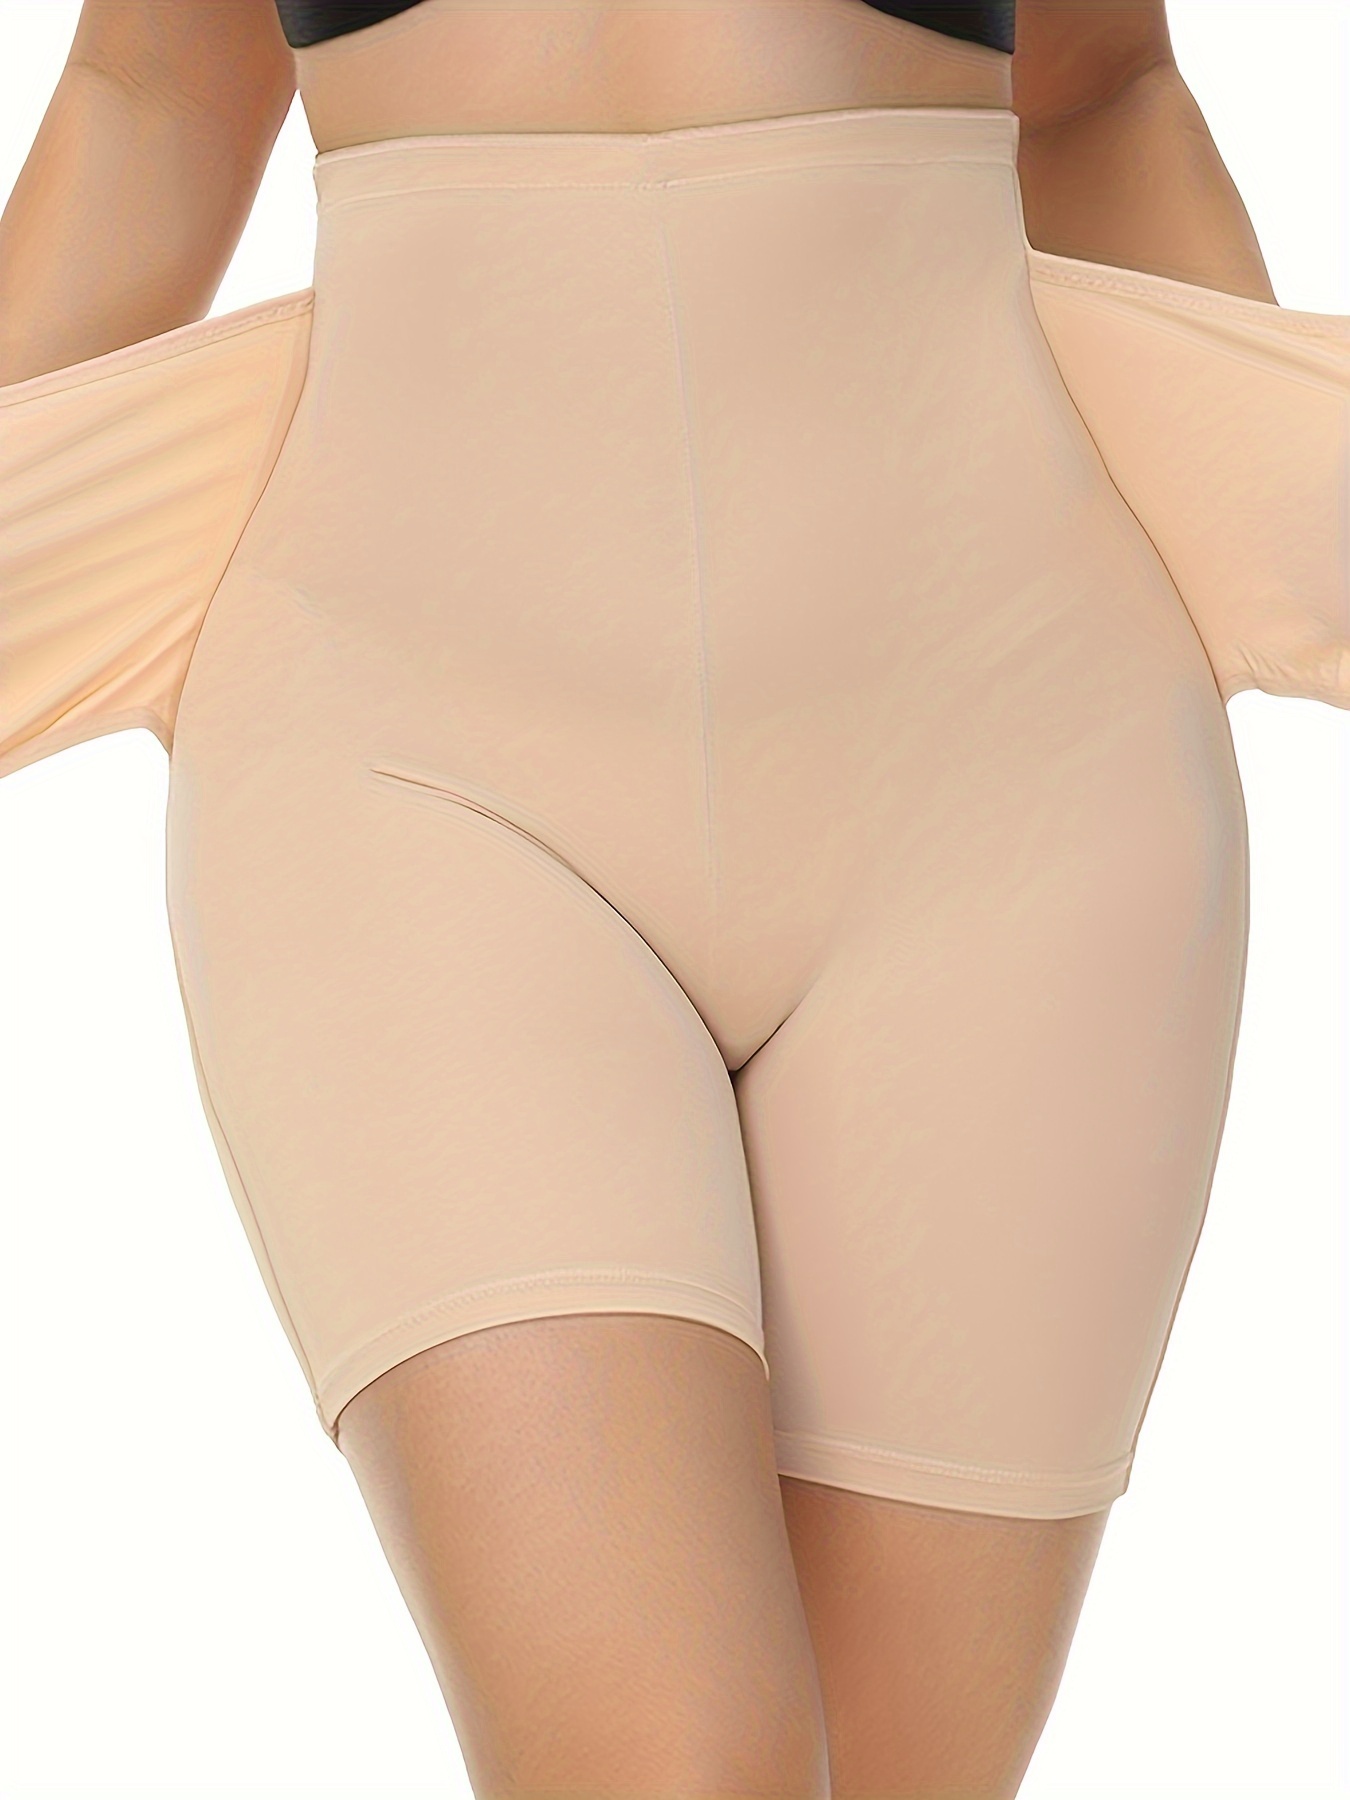 Nude Color, Large (29'-30')) WOMEN EXTRA FIRM UNDERWEAR TUMMY BODY